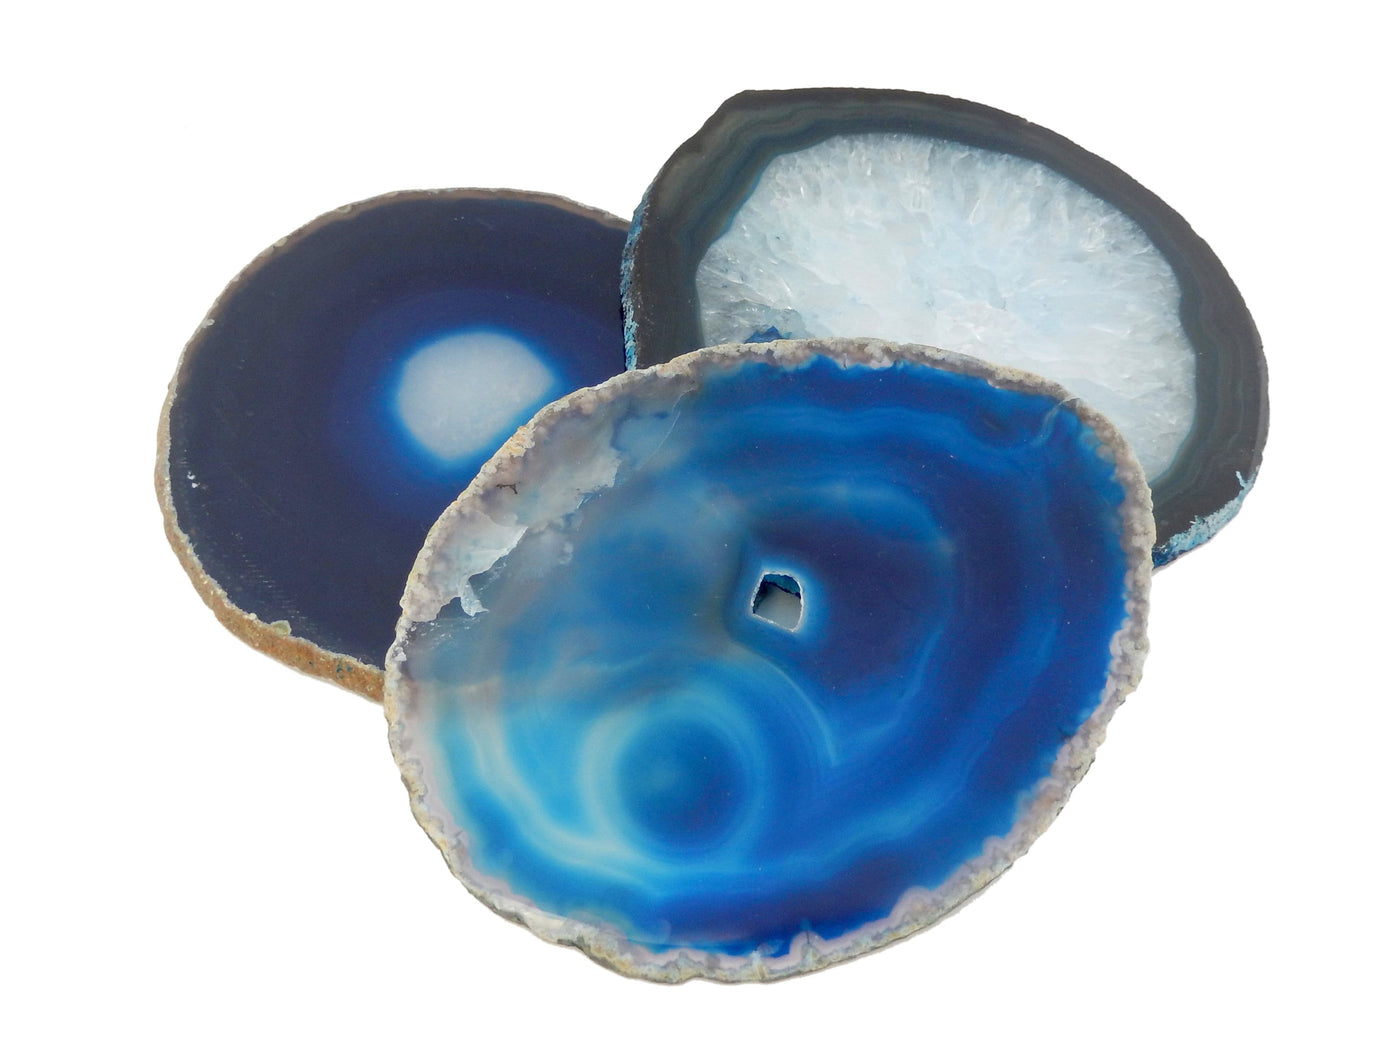 Blue agate slices displayed on white background to show various blue shades